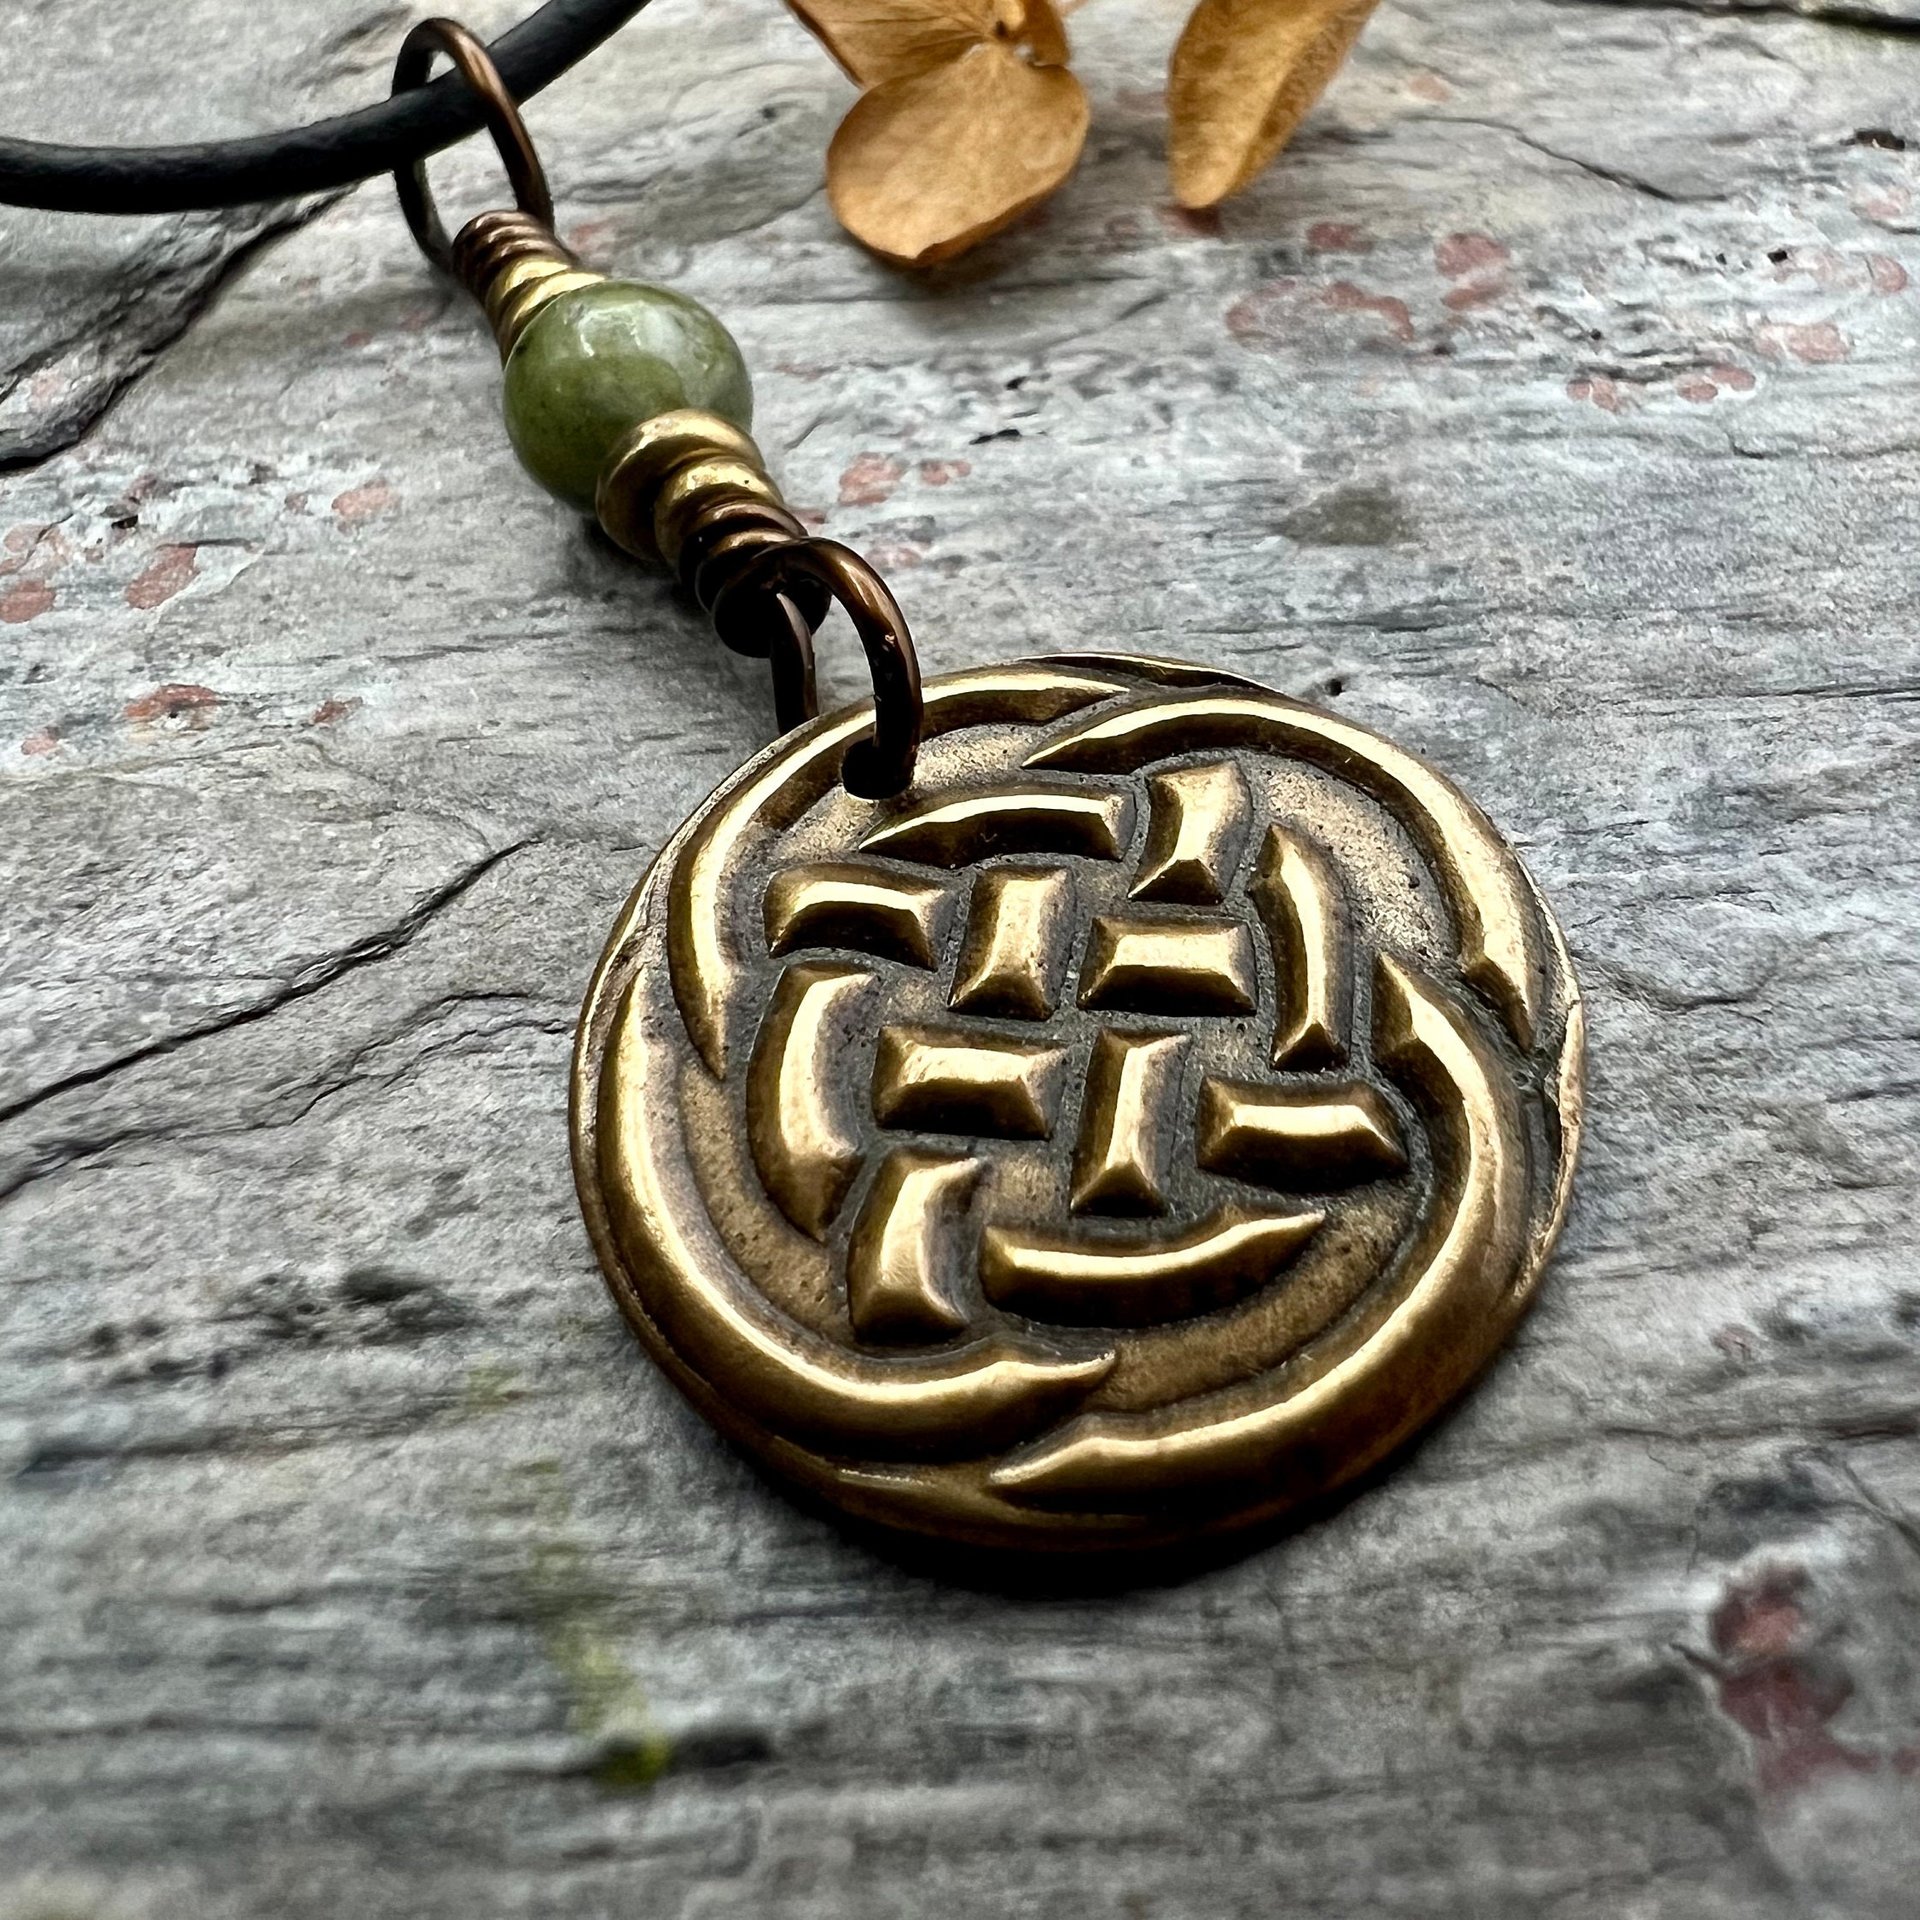 Celtic Knot Charm, Bronze Necklace, Wax Seal Charm, Connemara Marble, Irish Celtic Jewelry, Pagan, 8th Anniversary, Celtic Witch, Intertwine